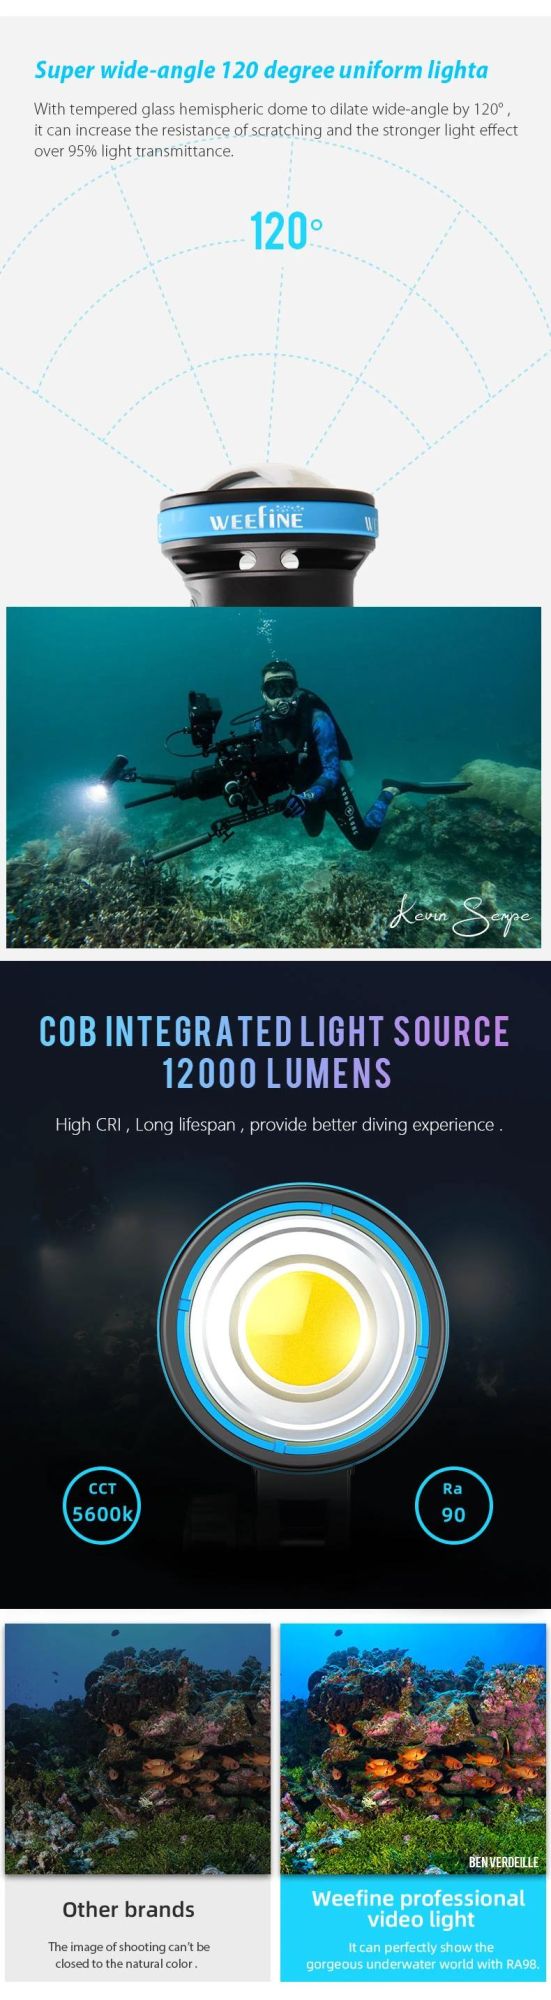 Innovative Patent Ring Battery Indicator High-Ned Dive Scuba Light for Underwater Application